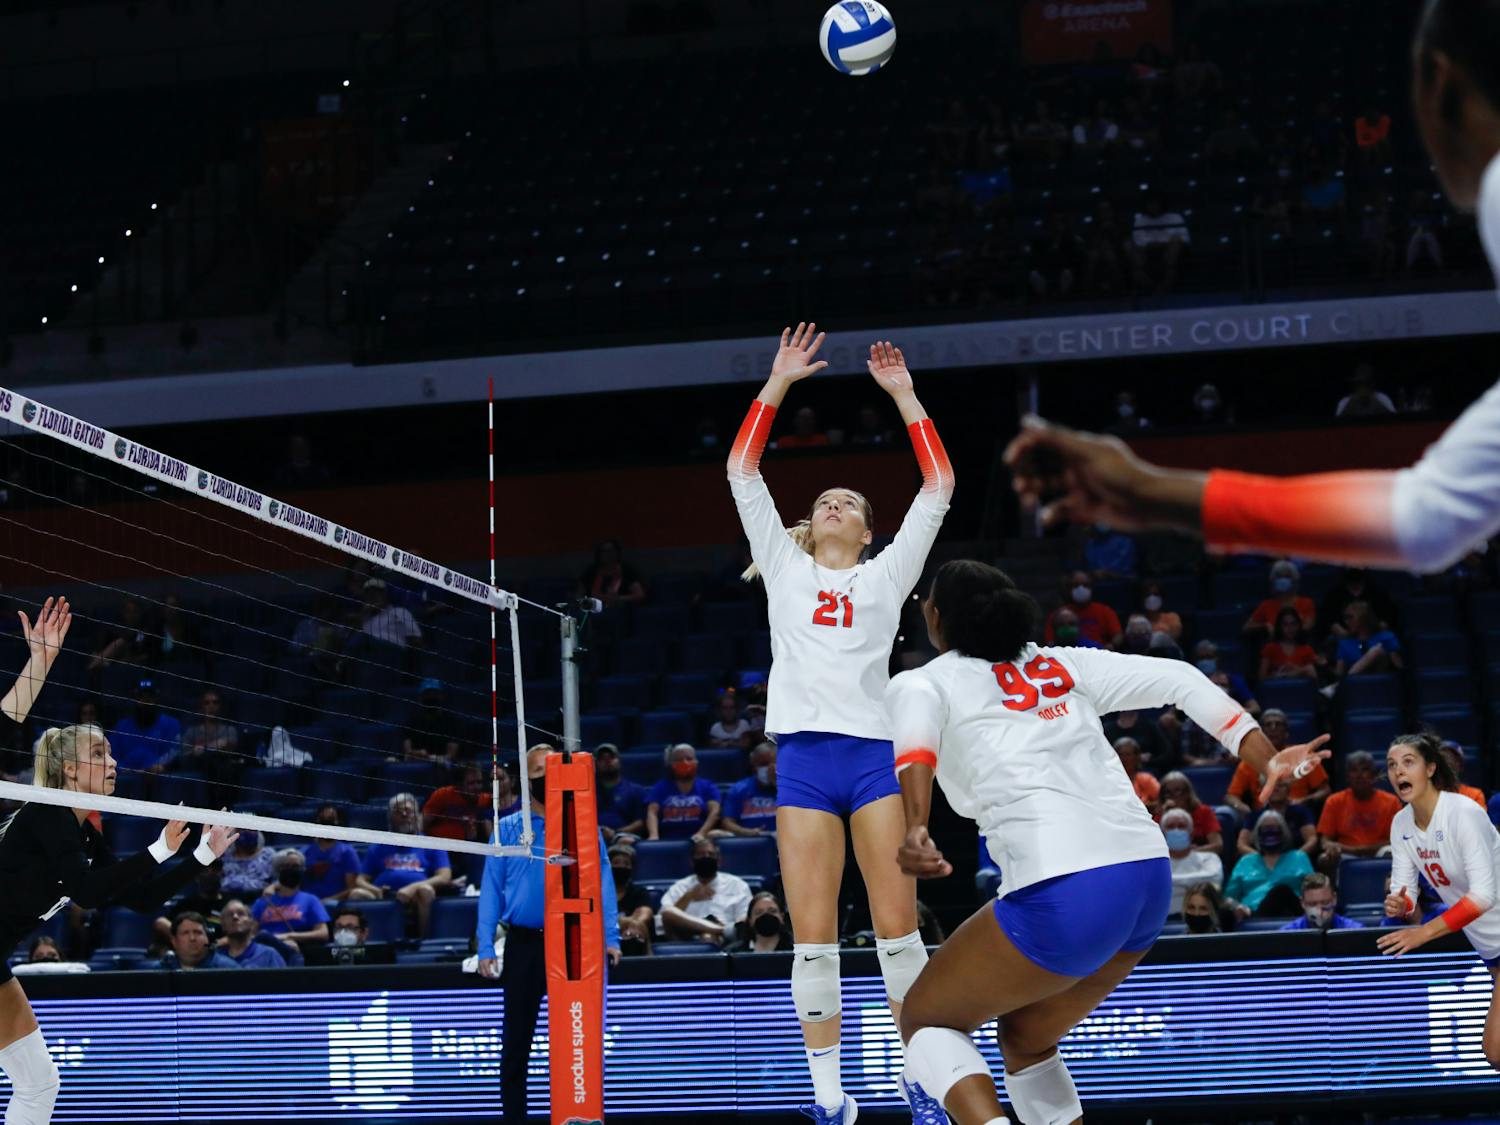 Florida's Marlie Monserez jumps to set the ball against Texas A&M on Oct. 16.